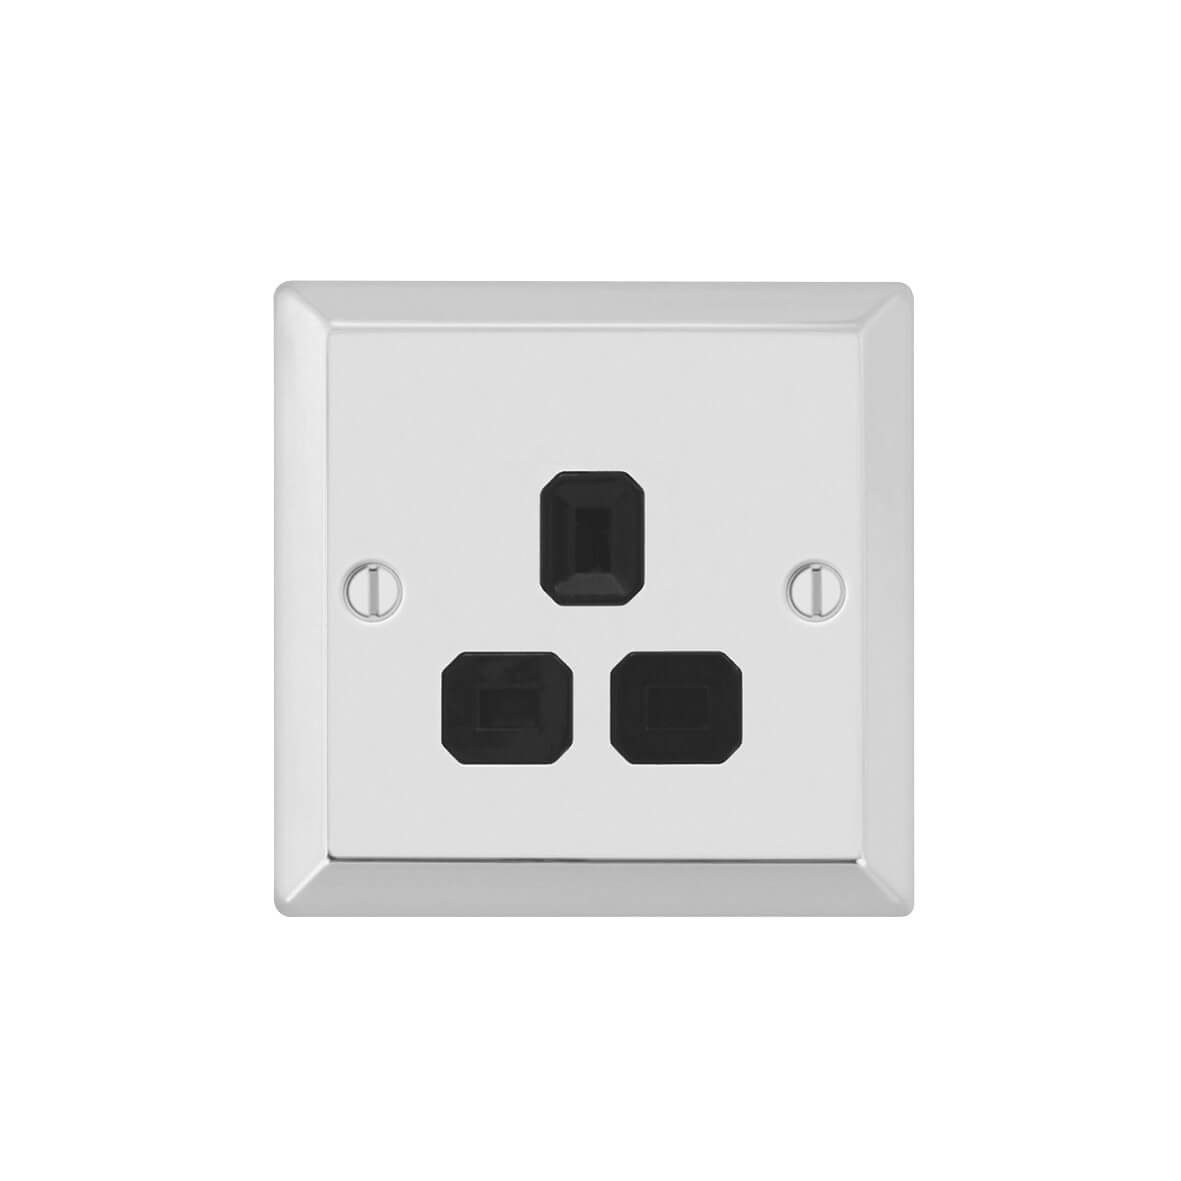 Wall Socket for Round 3 Pin Plug 5A Unswitched or 15A Switched Table Lamp Light 